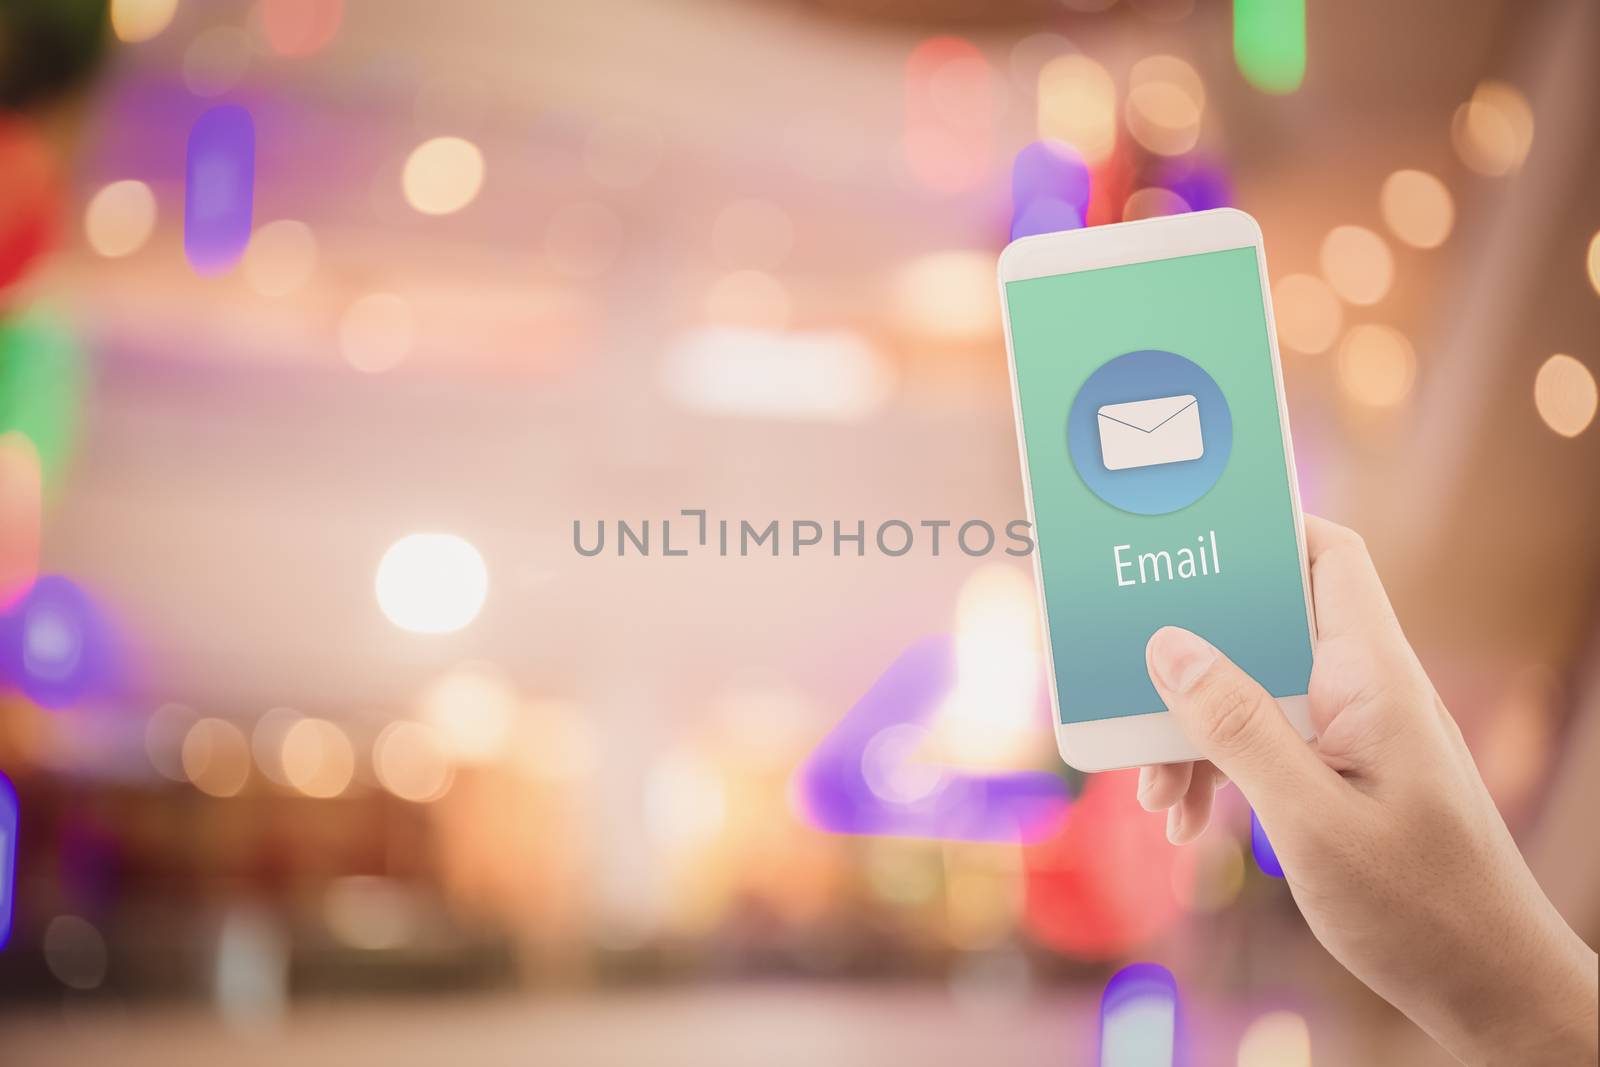 Hand holding man check and sending message with email in a phone on abstract bokeh background, communication concept.